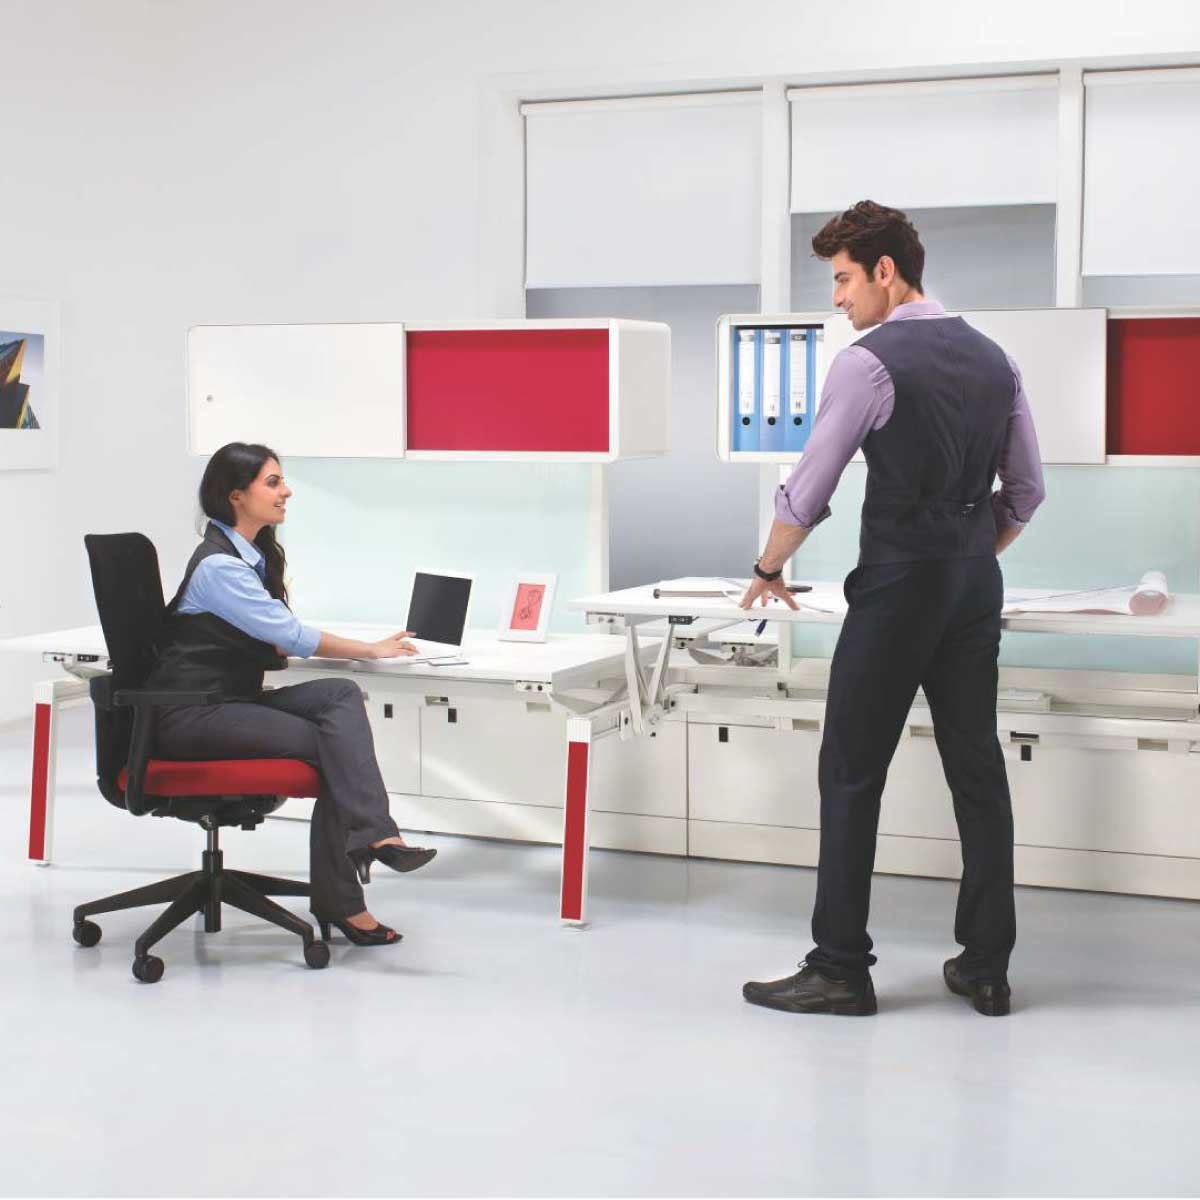 Adjustable Workstations Manufacturers, Suppliers in Rohini Sector 22